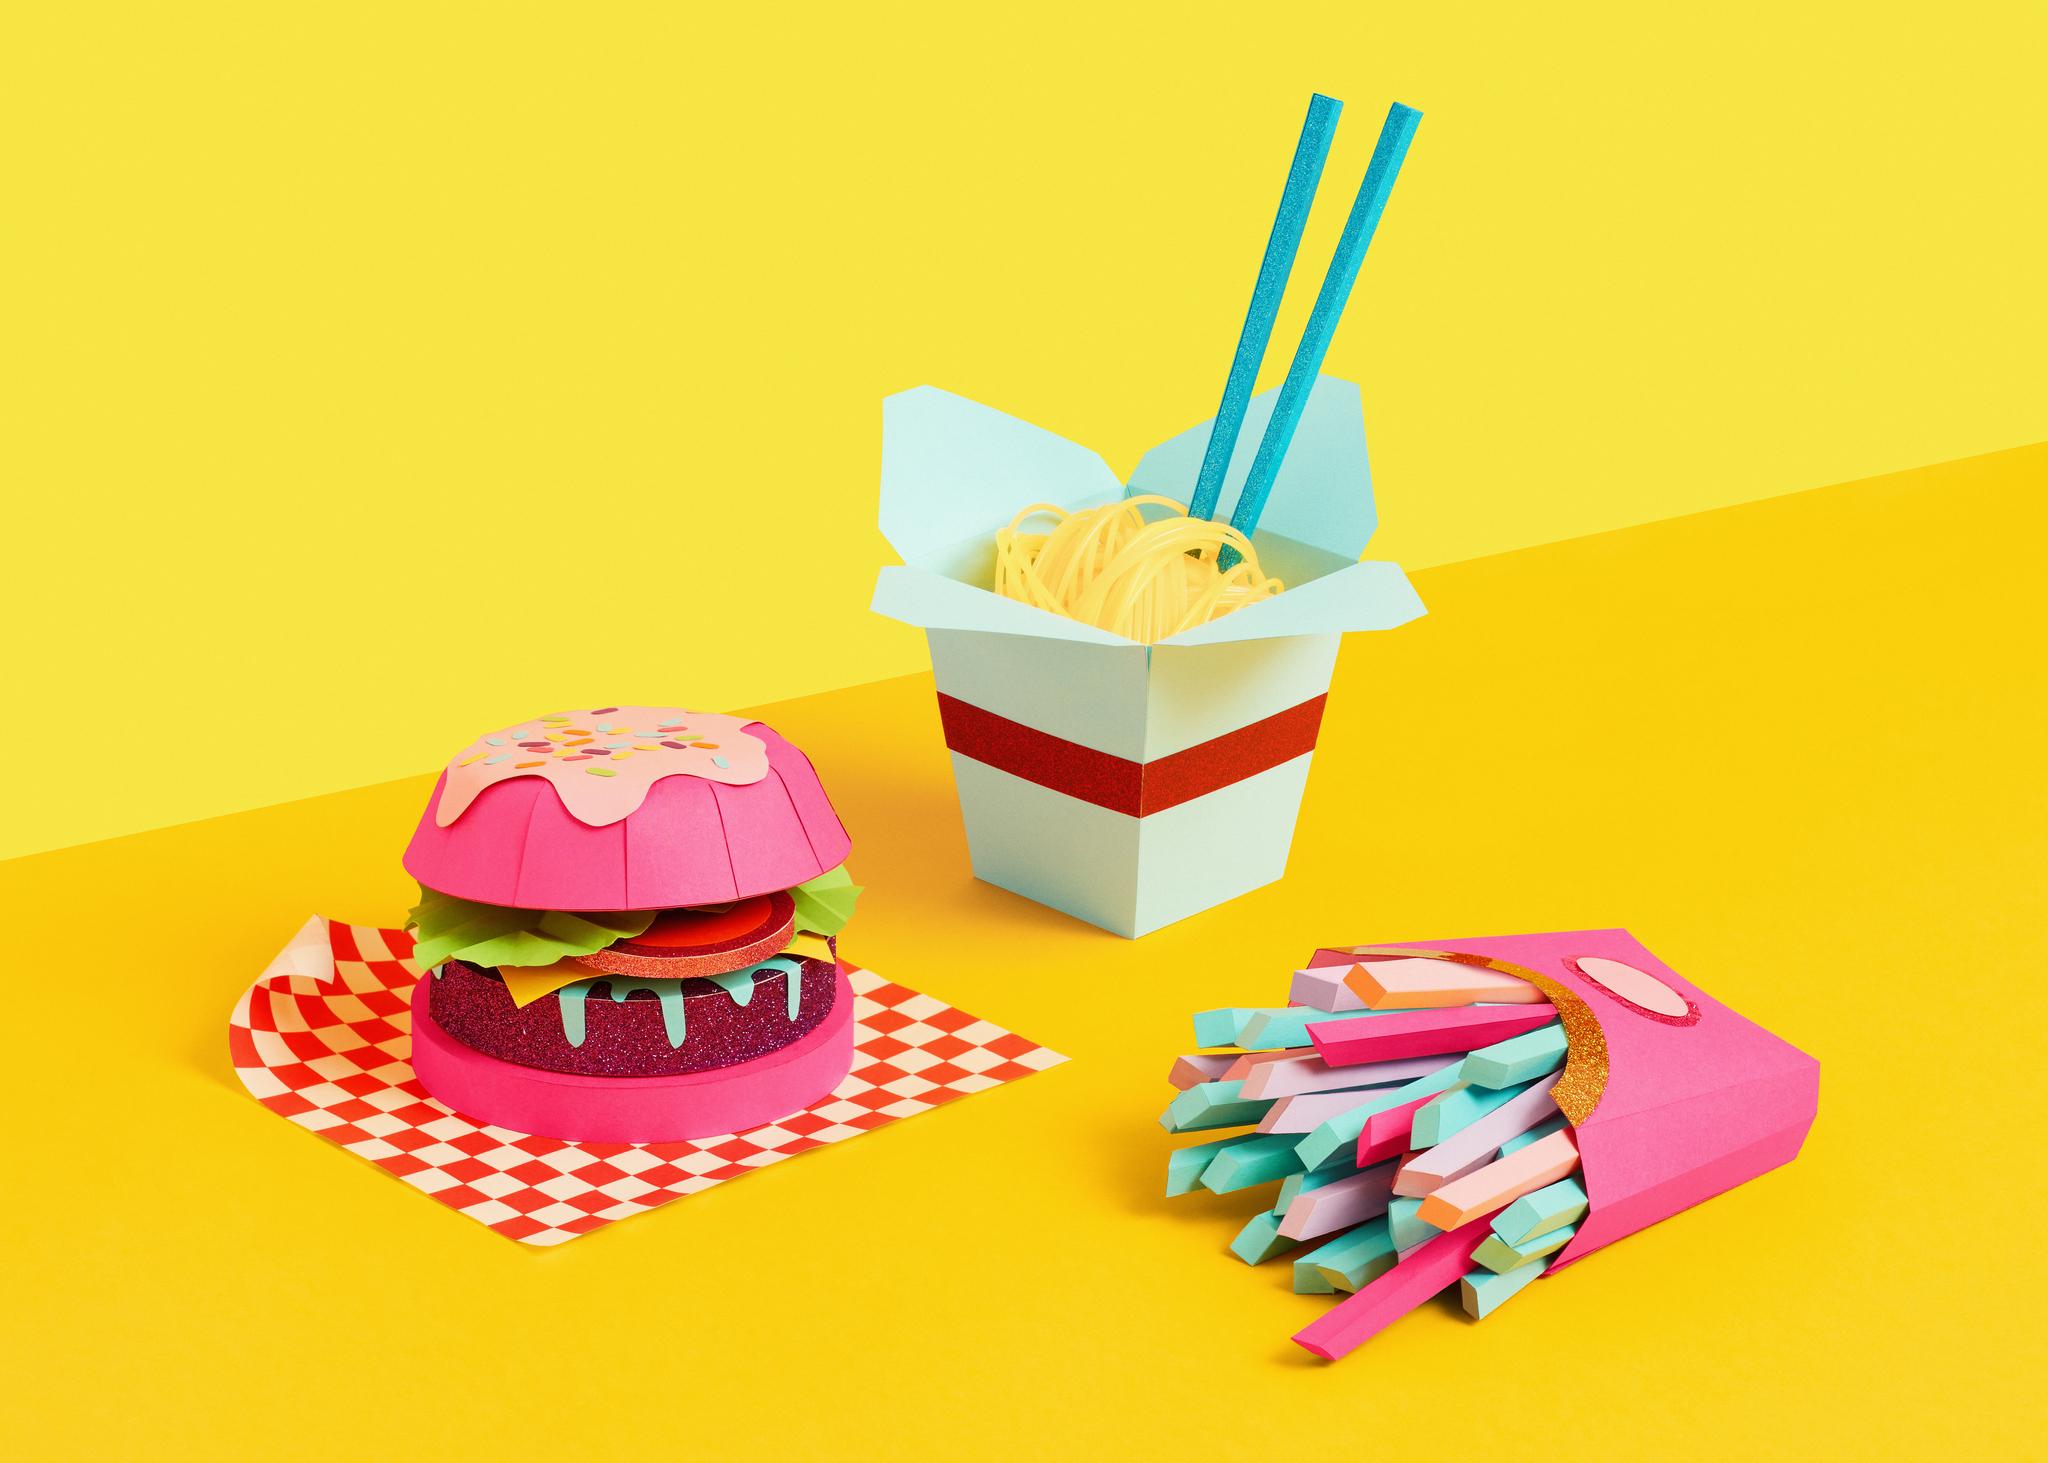  An origami burger, origami noodles and origami fries displayed on a yellow background. 